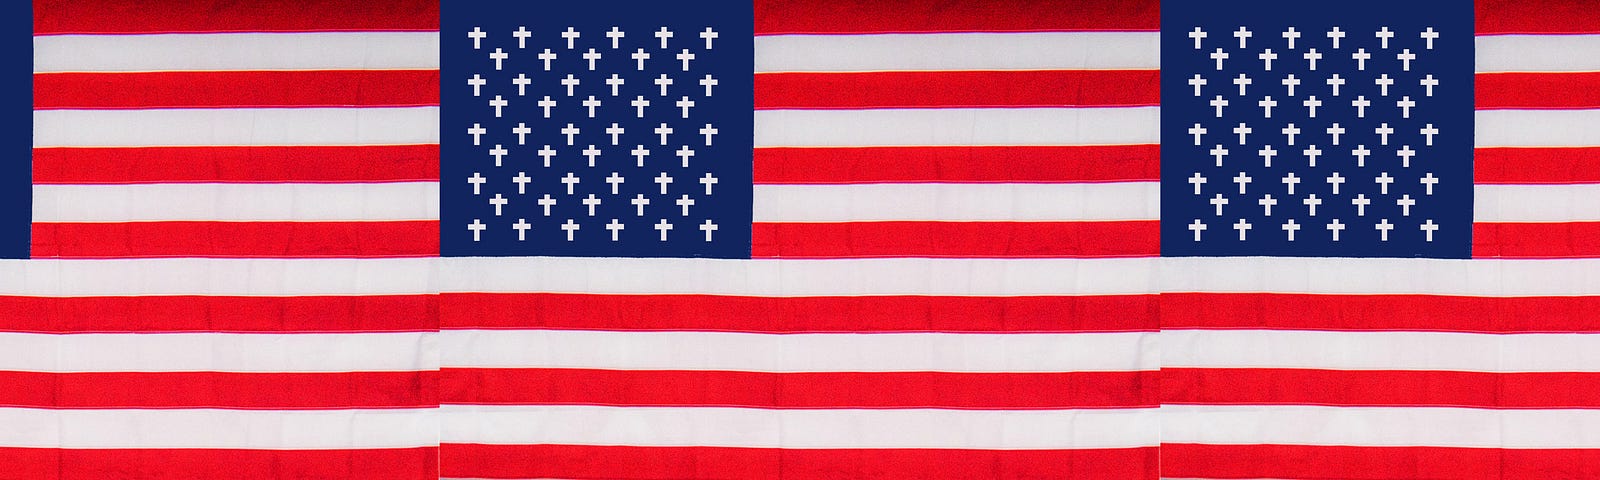 3 US flags with crosses substituted for stars